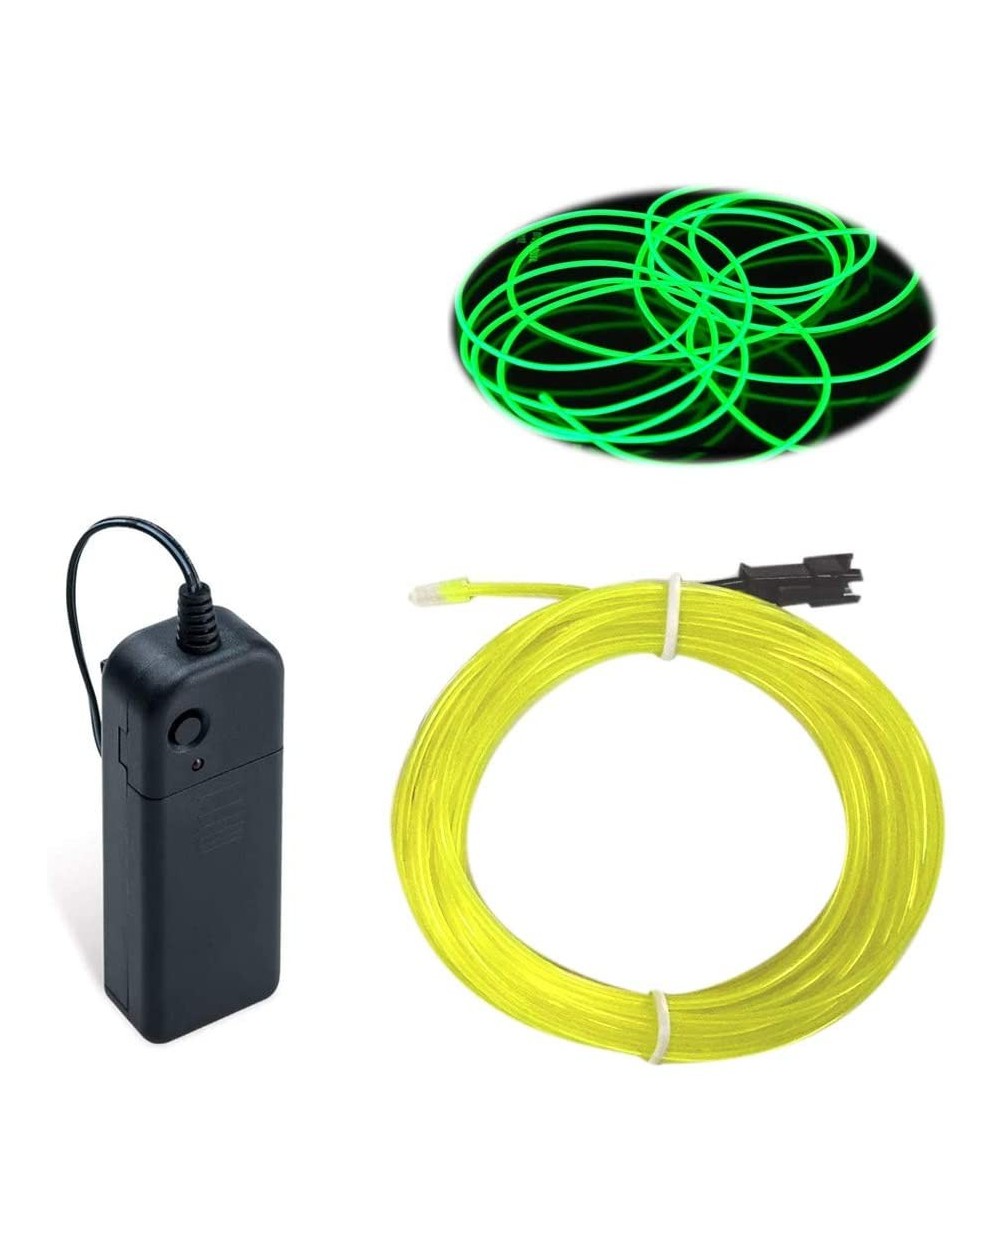 Rope Lights EL Wire Lime Green- 16ft Neon Lights Noise Reduction Neon Glowing Strobing Electroluminescent Wire for Parties- H...